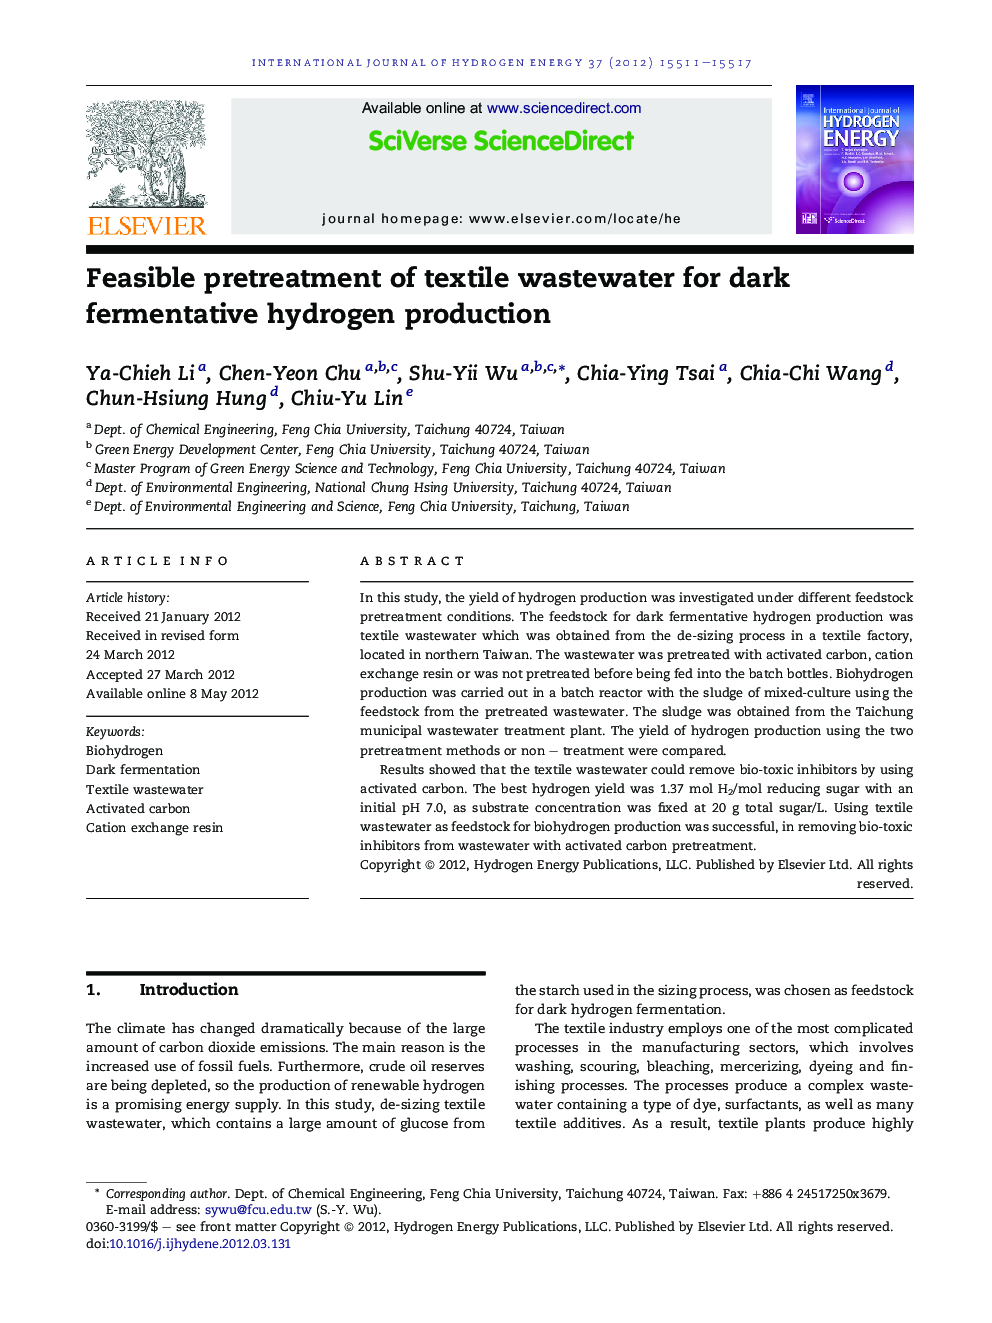 Feasible pretreatment of textile wastewater for dark fermentative hydrogen production